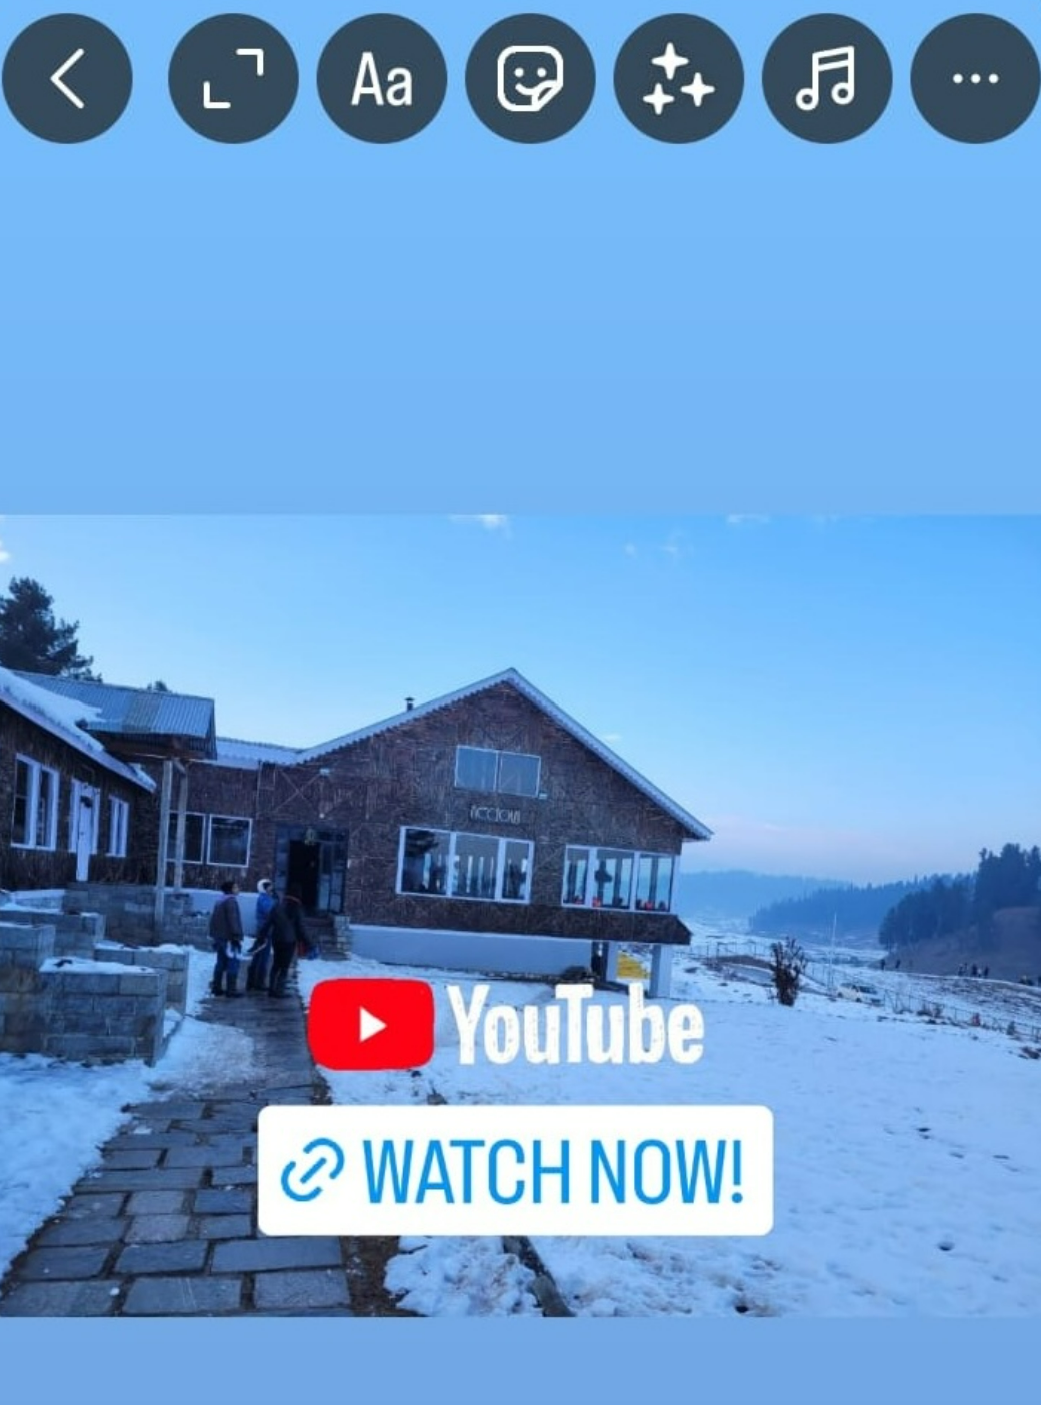 Sharing a YouTube Short's link on Instagram story